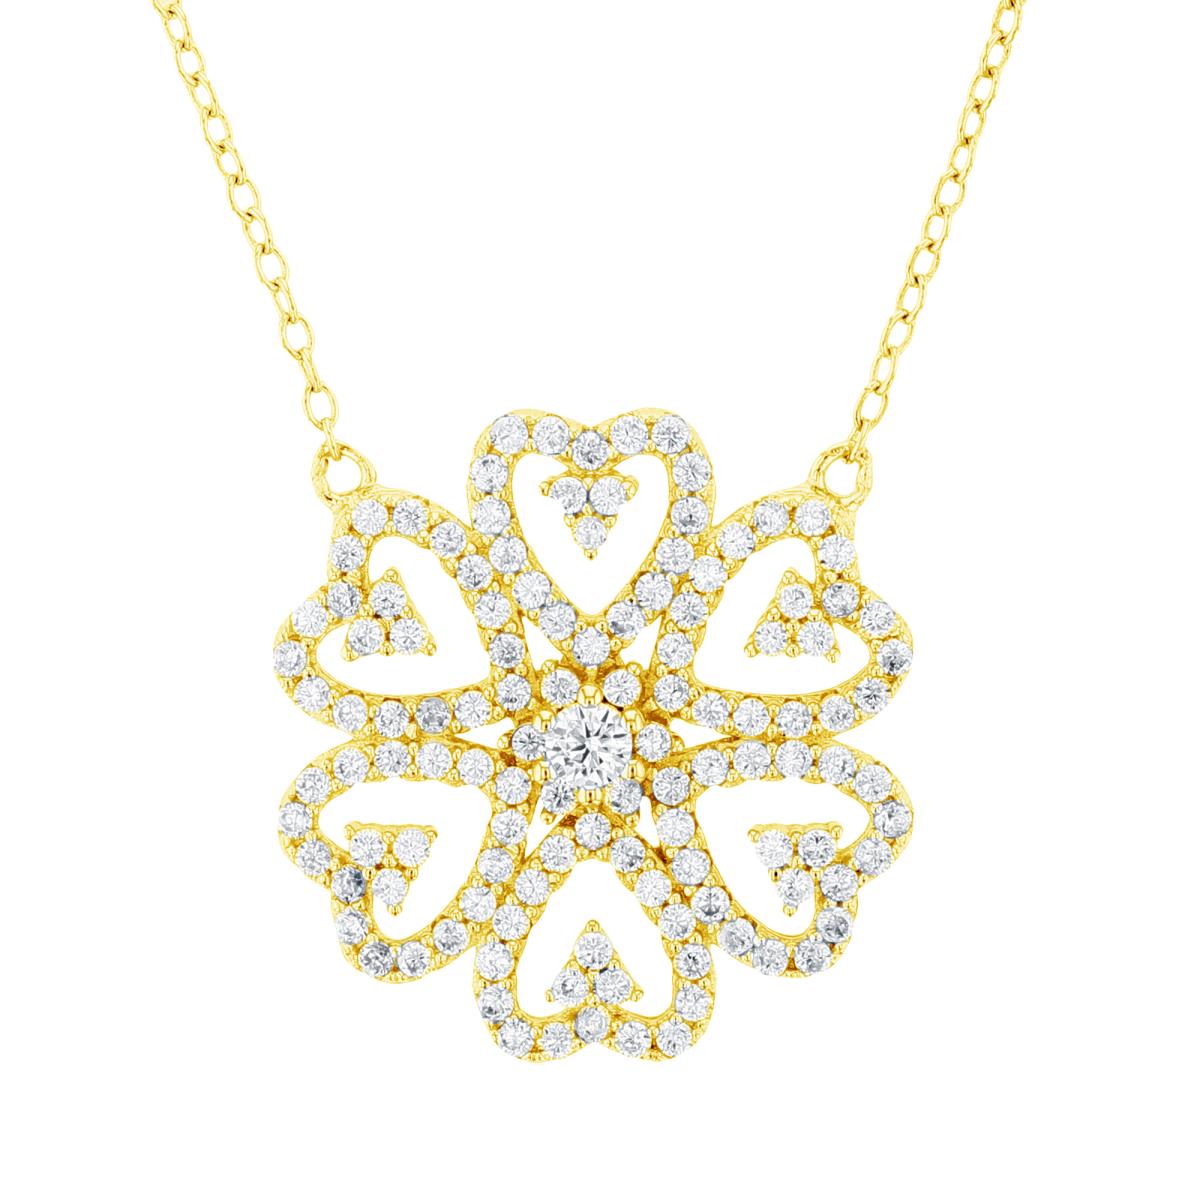 Sterling Silver +1Micron Yellow Gold Rnd White CZ Flower 18"Necklace